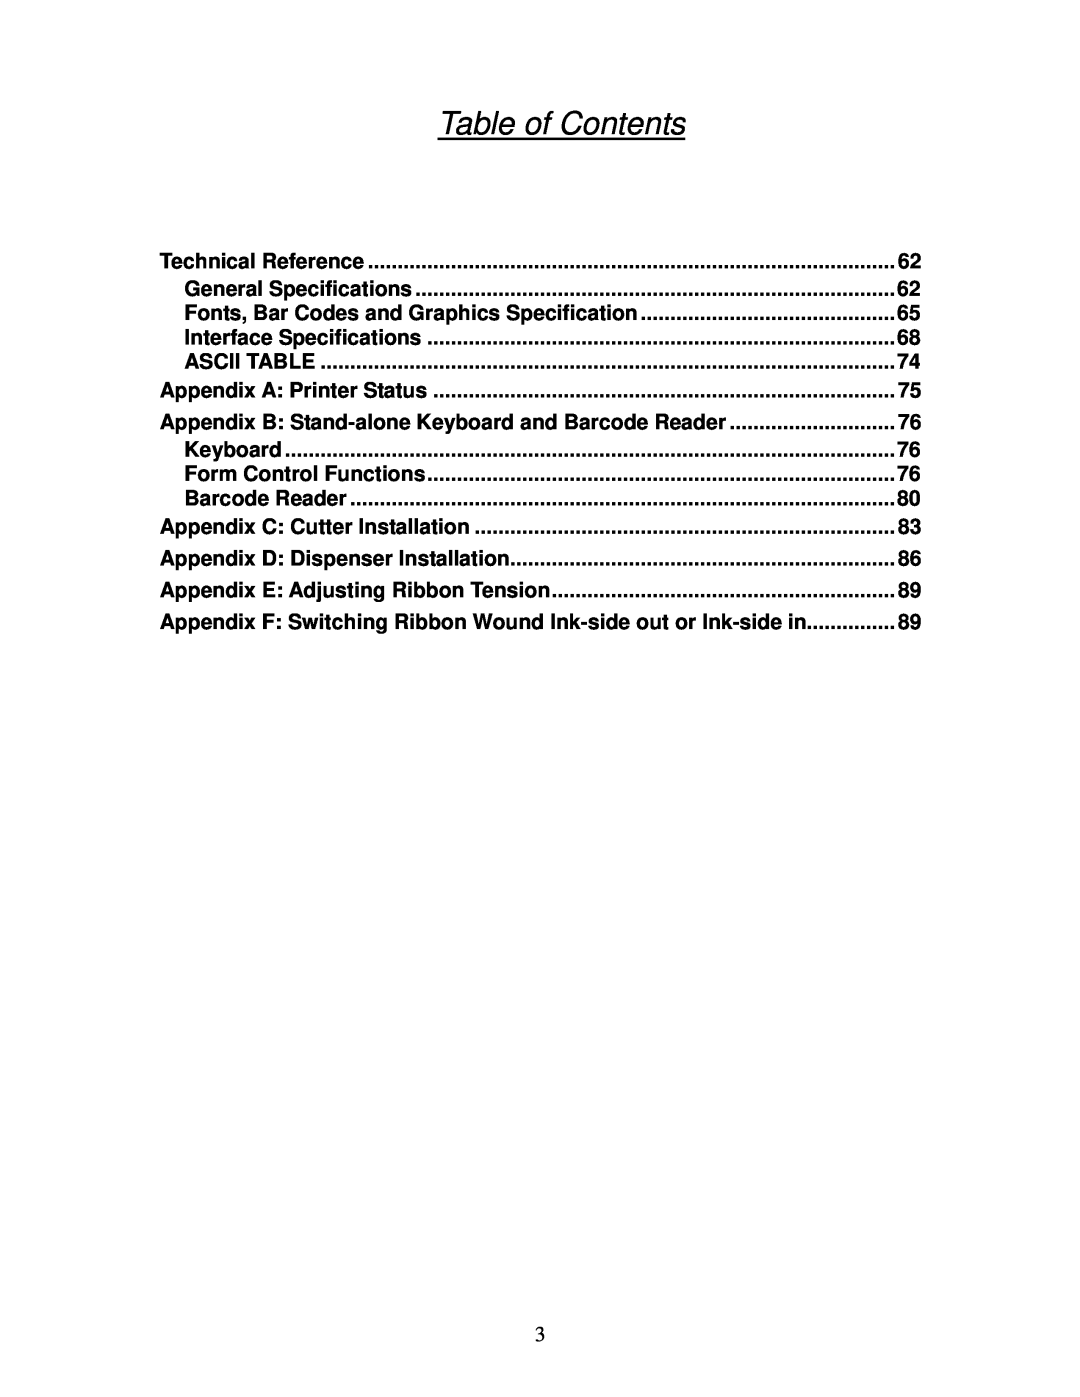 AMT Datasouth 4600 manual Table of Contents, Technical Reference 